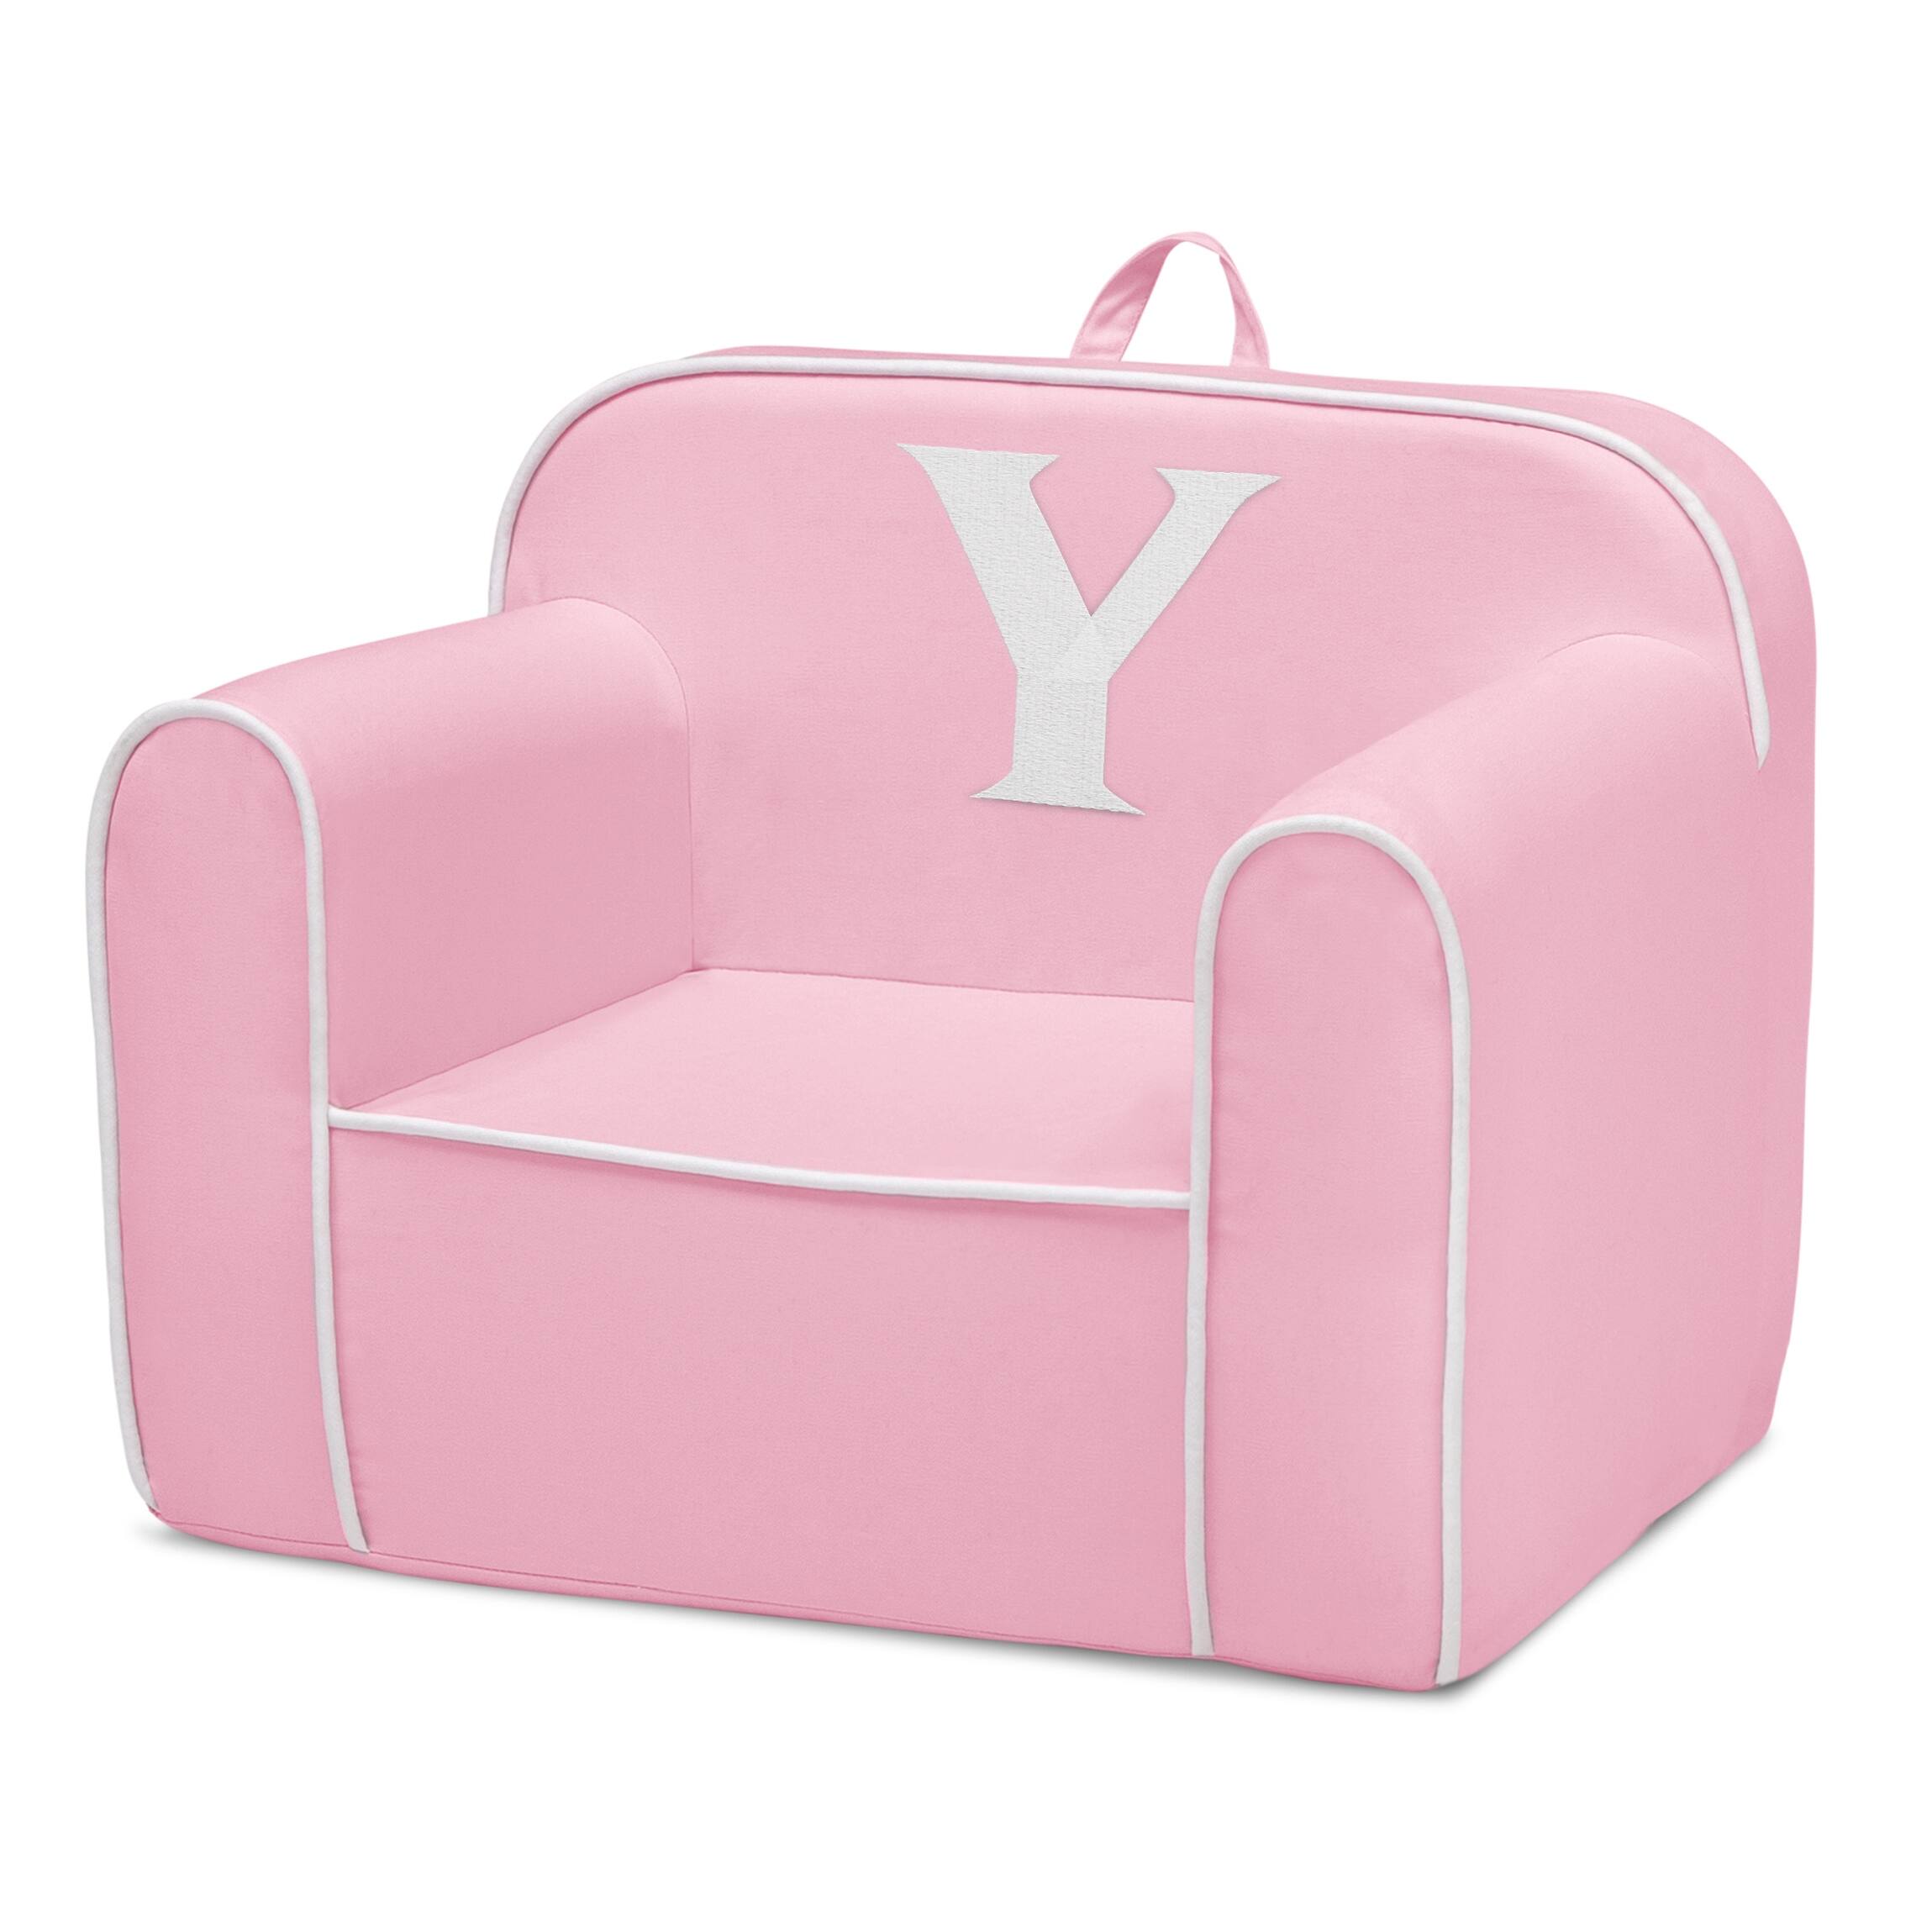 Delta Children Personalized Monogram Cozee Chair - Customize with Letter Y